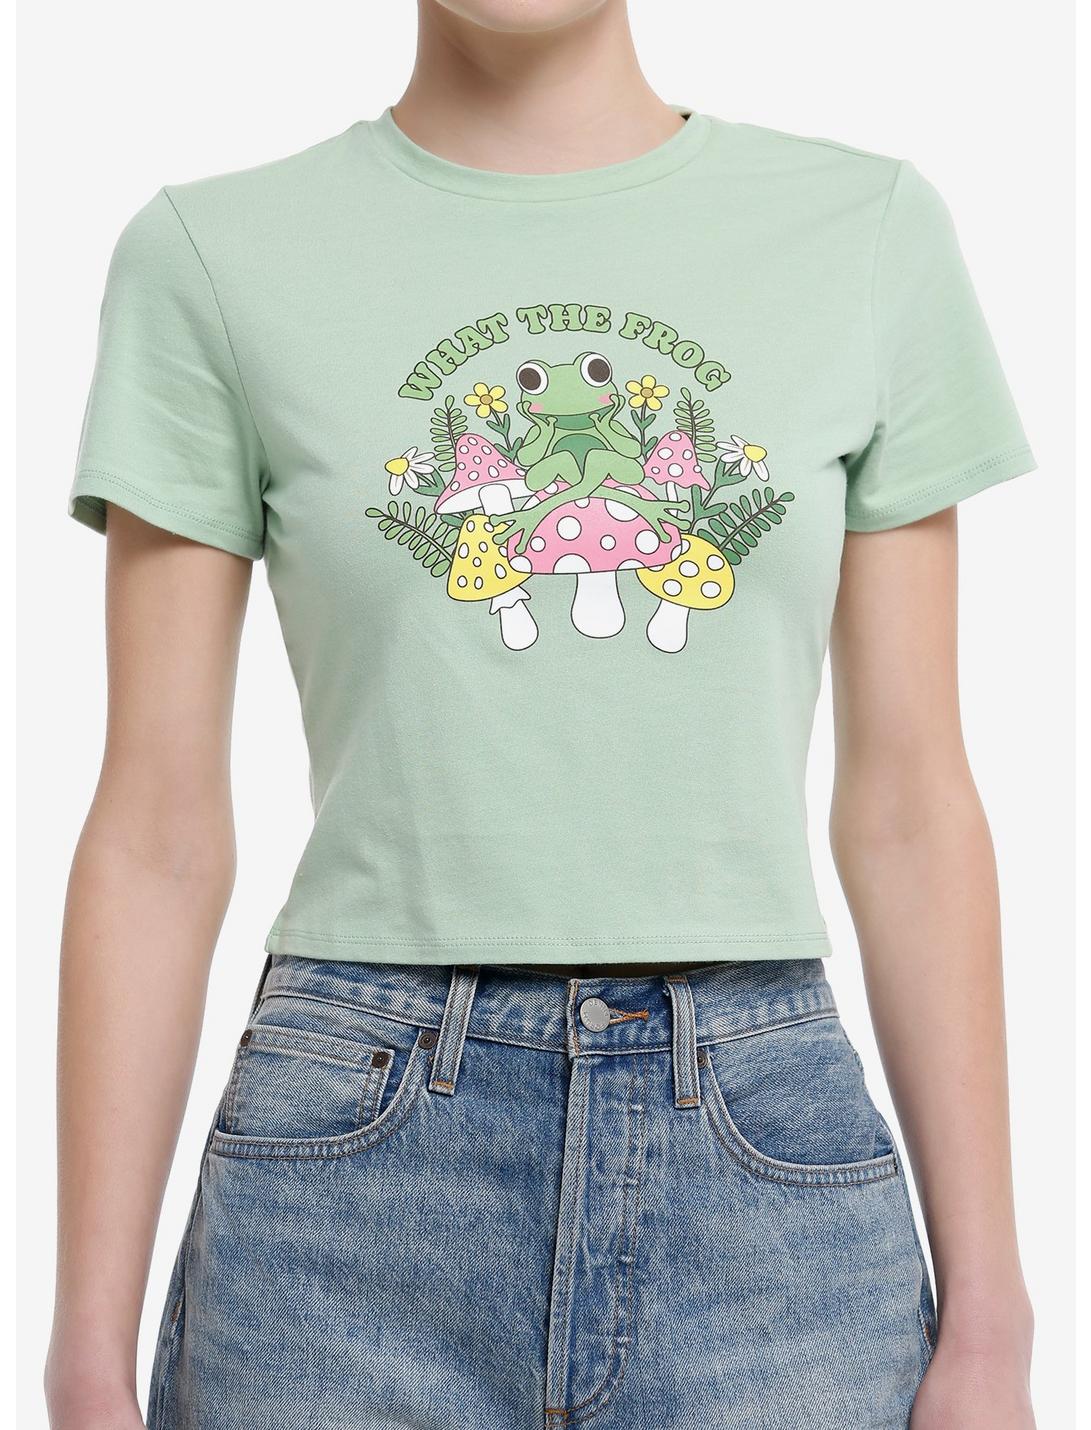 Thorn & Fable What The Frog Girls Baby T-Shirt, PINK, hi-res